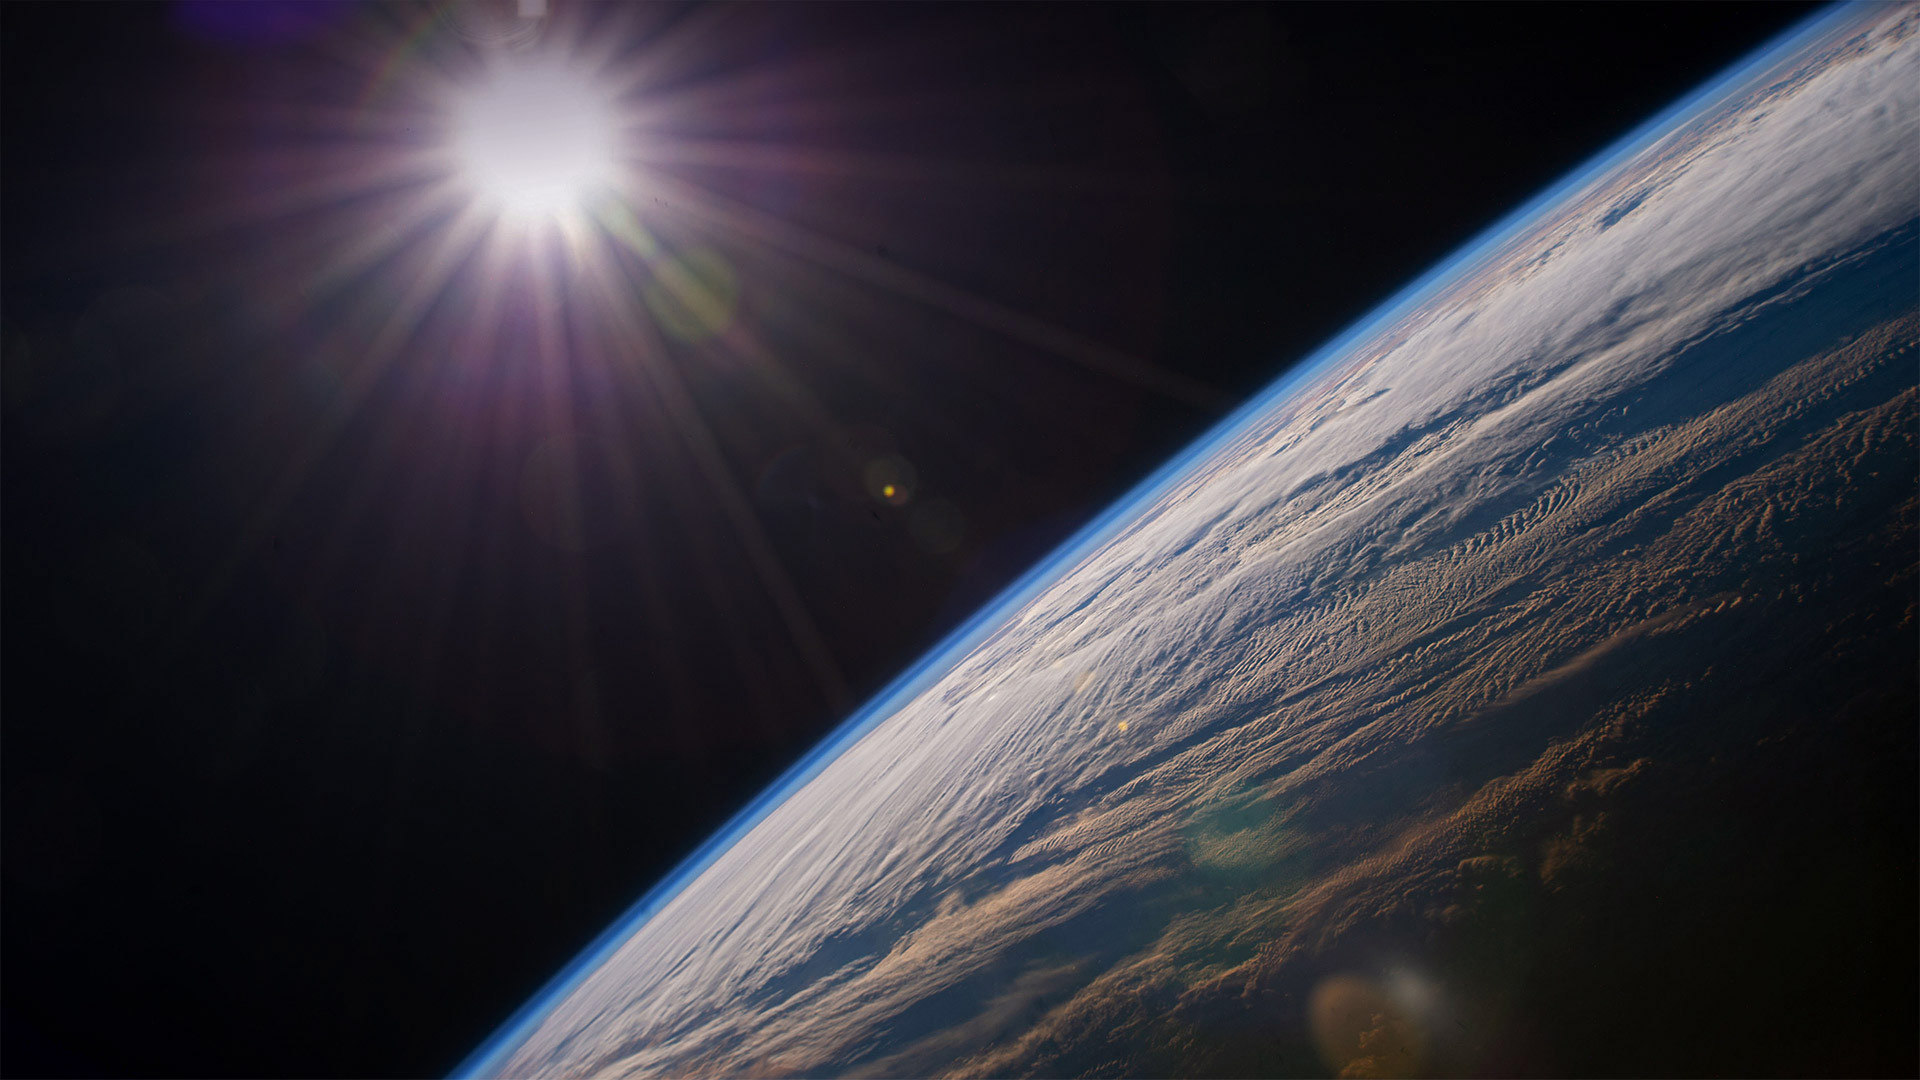 Earth as seen from the International Space Station - JSC/NASA)